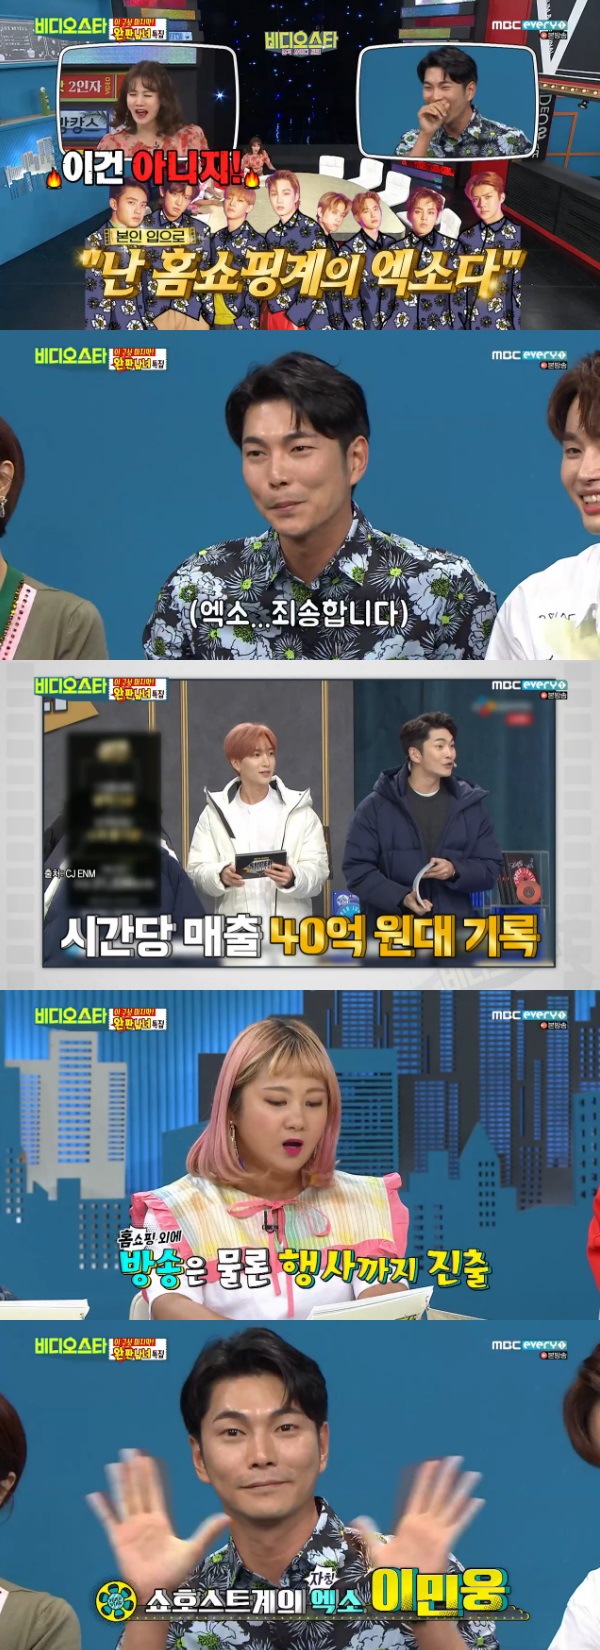 Video Star Park So-hyun has hit the title of Home Shopping EXO.MBC Everlon entertainment program Video Star, which aired on the 25th, featured Yoo Nan-hee, Dong Ji-hyun, Lee Min-woong, Lee Chan-seok and Kim Sa-rom as special features of the show host.Park Na-rae said that he introduced Lee Min-yong and said that he is popular with viewers with his charming appearance and half-talk concept.Park Na-rae paused, And I think Park So-hyun will hate it if I say this to my personal.Park Na-rae said, It is called the home shopping EXO.Park So-hyun said, Is this it? Park Na-rae laughed when he pointed out, Did you use the show host to be an entertainer?